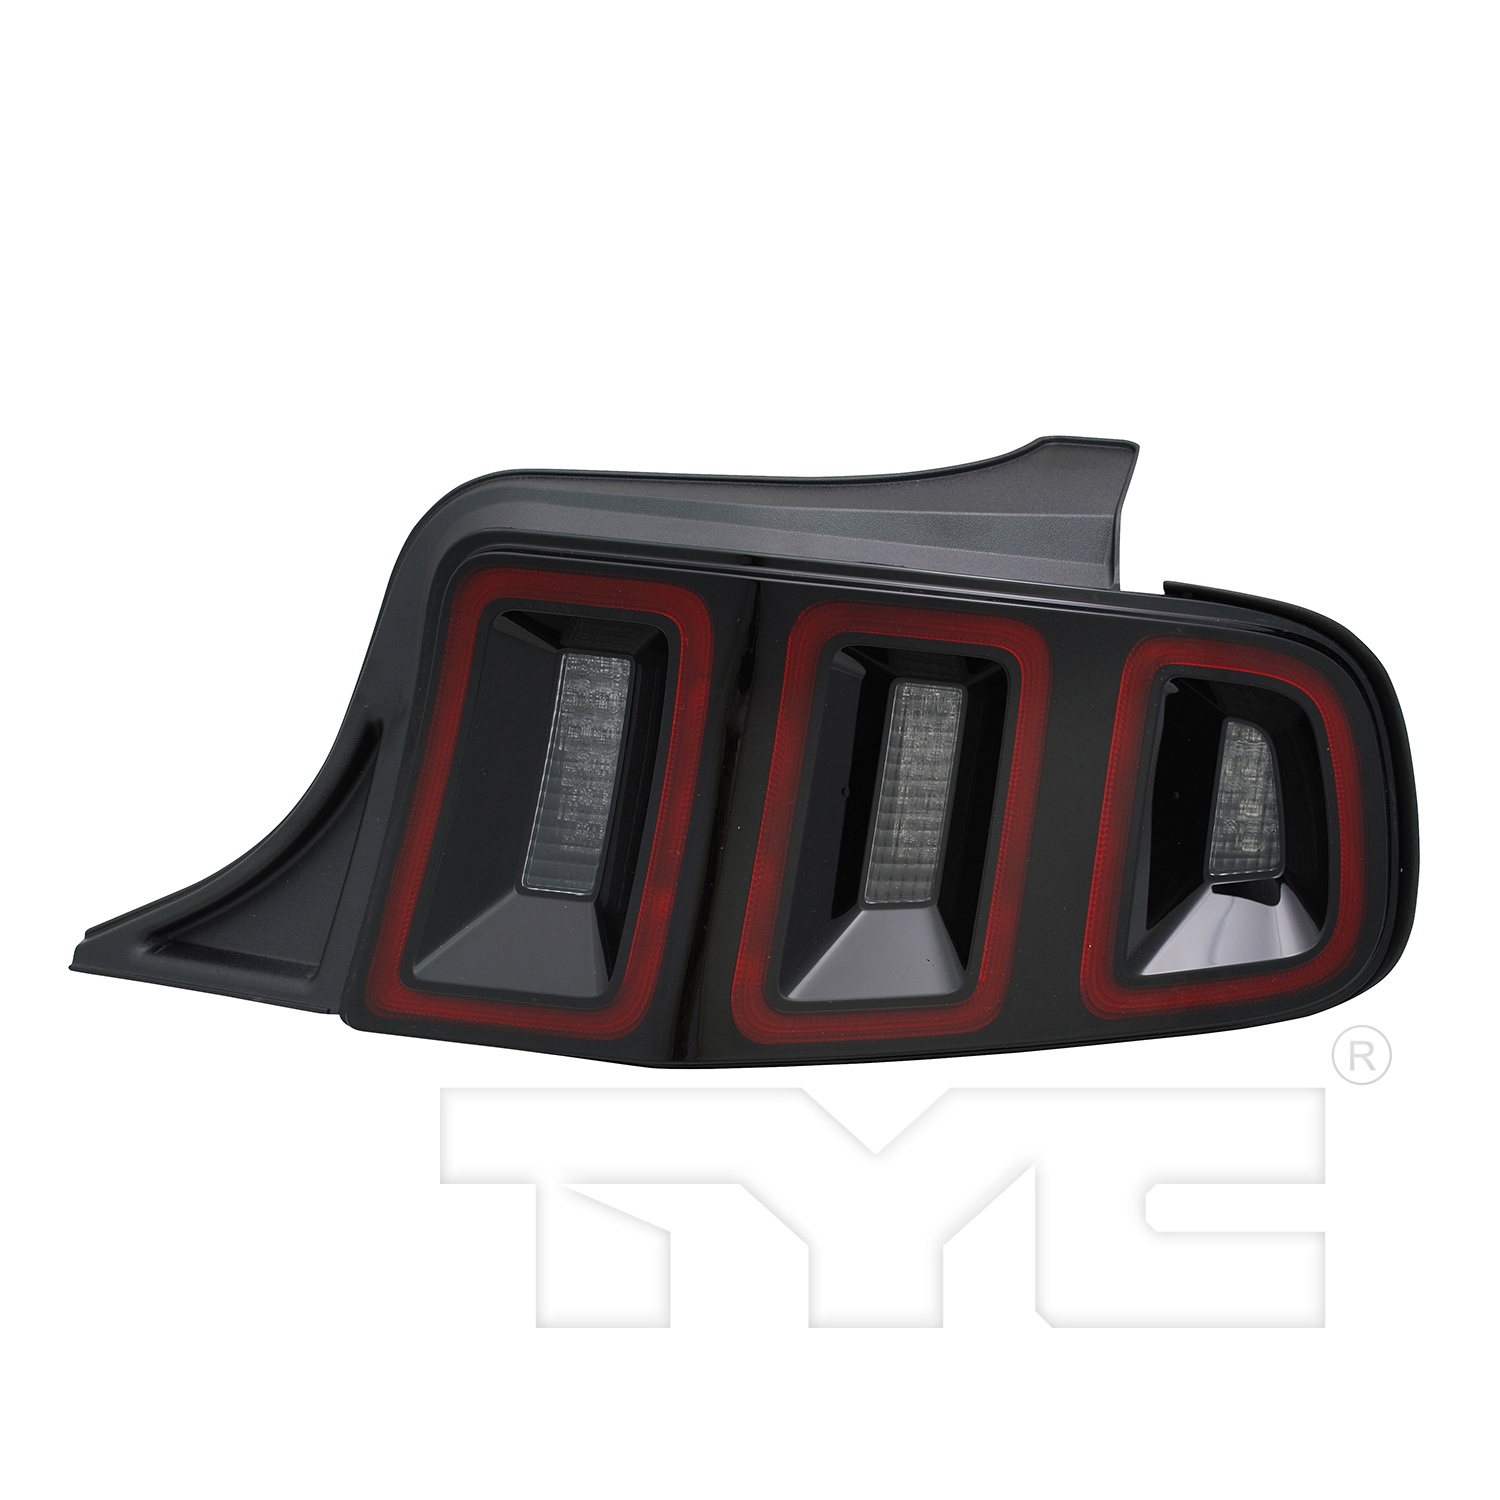 Aftermarket TAILLIGHTS for FORD - MUSTANG, MUSTANG,13-14,RT Taillamp assy